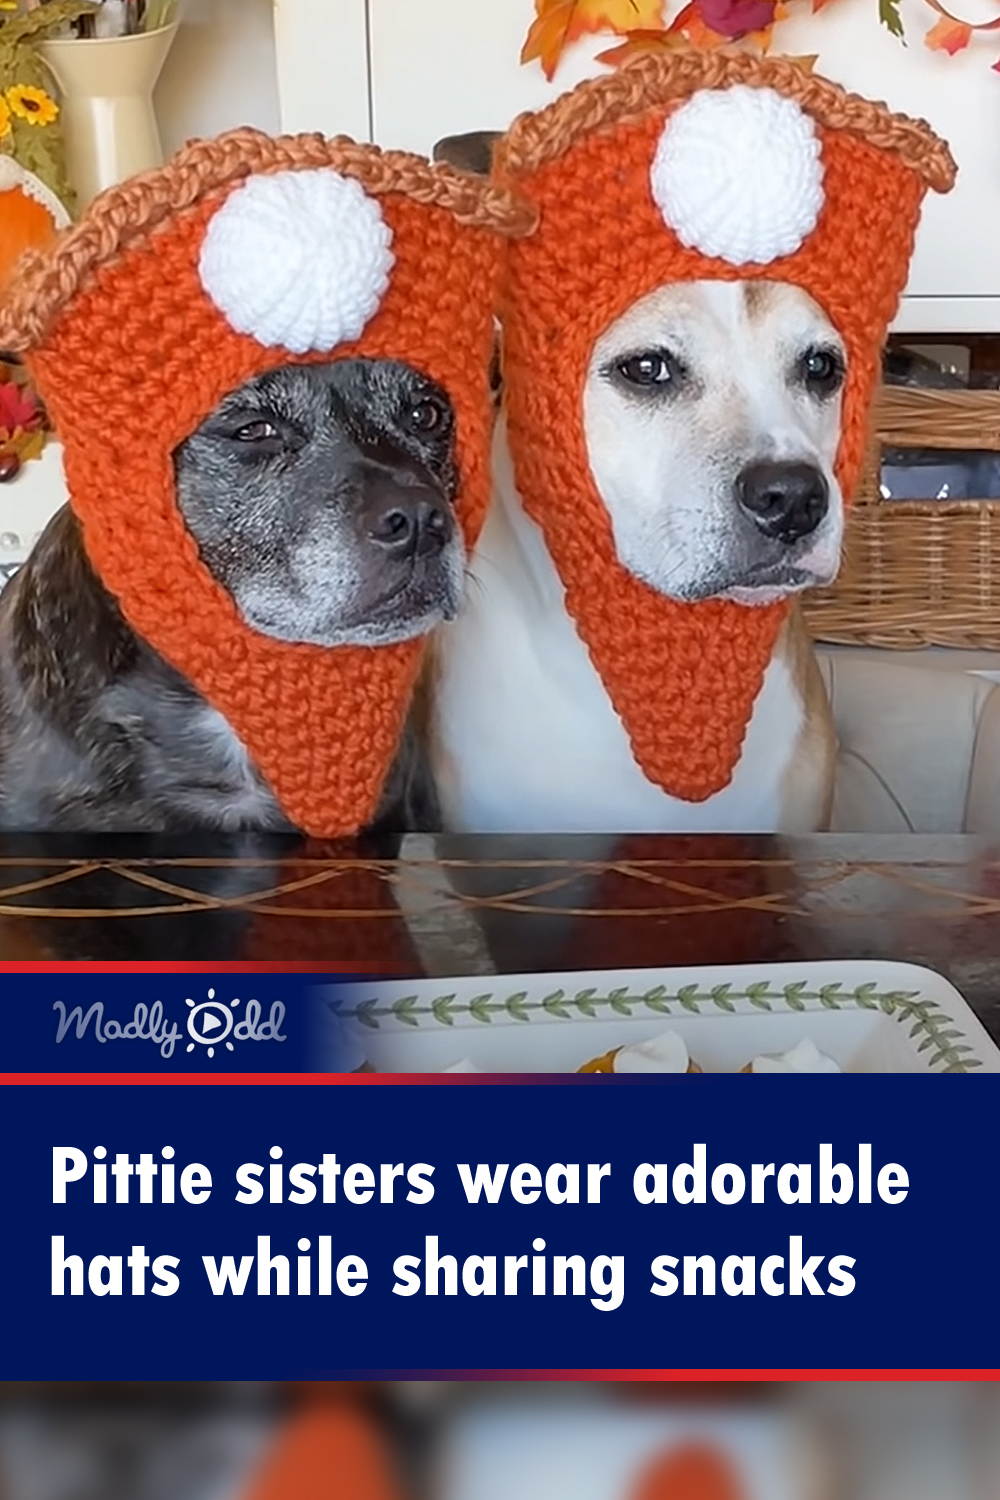 Pittie sisters wear adorable hats while sharing snacks